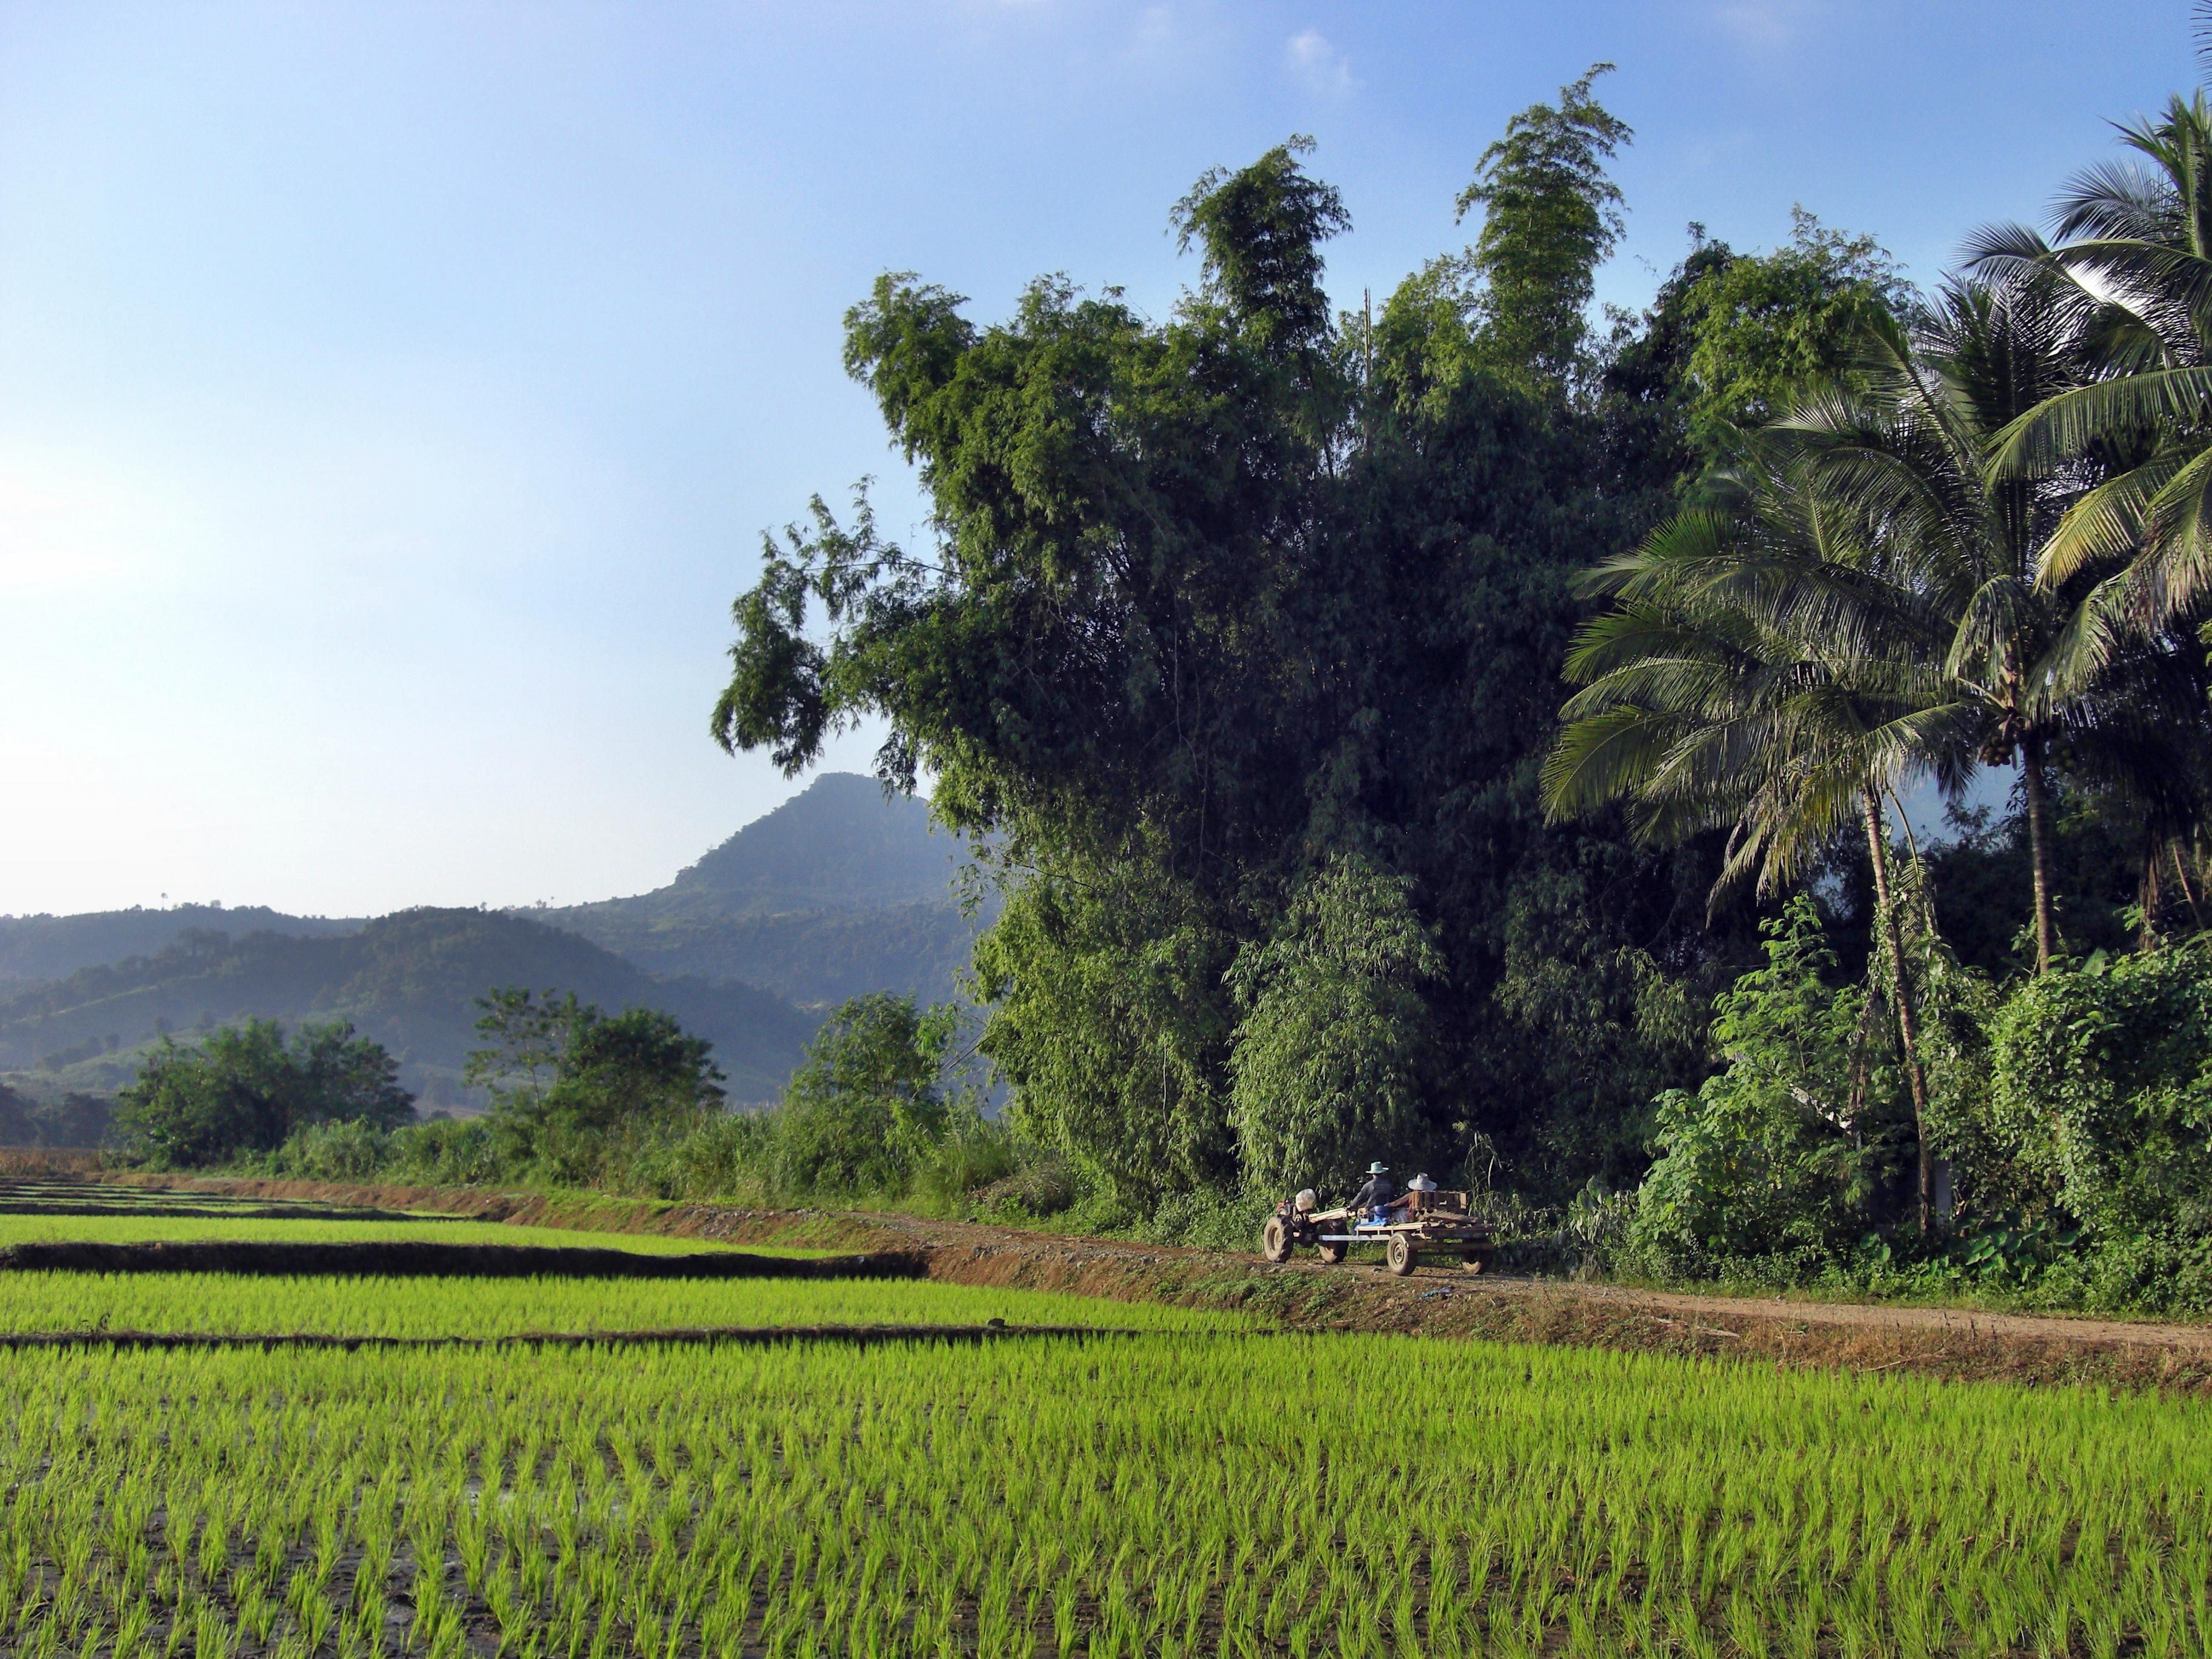 The typical landscape in Isaan. Rice fields in everywhere ...